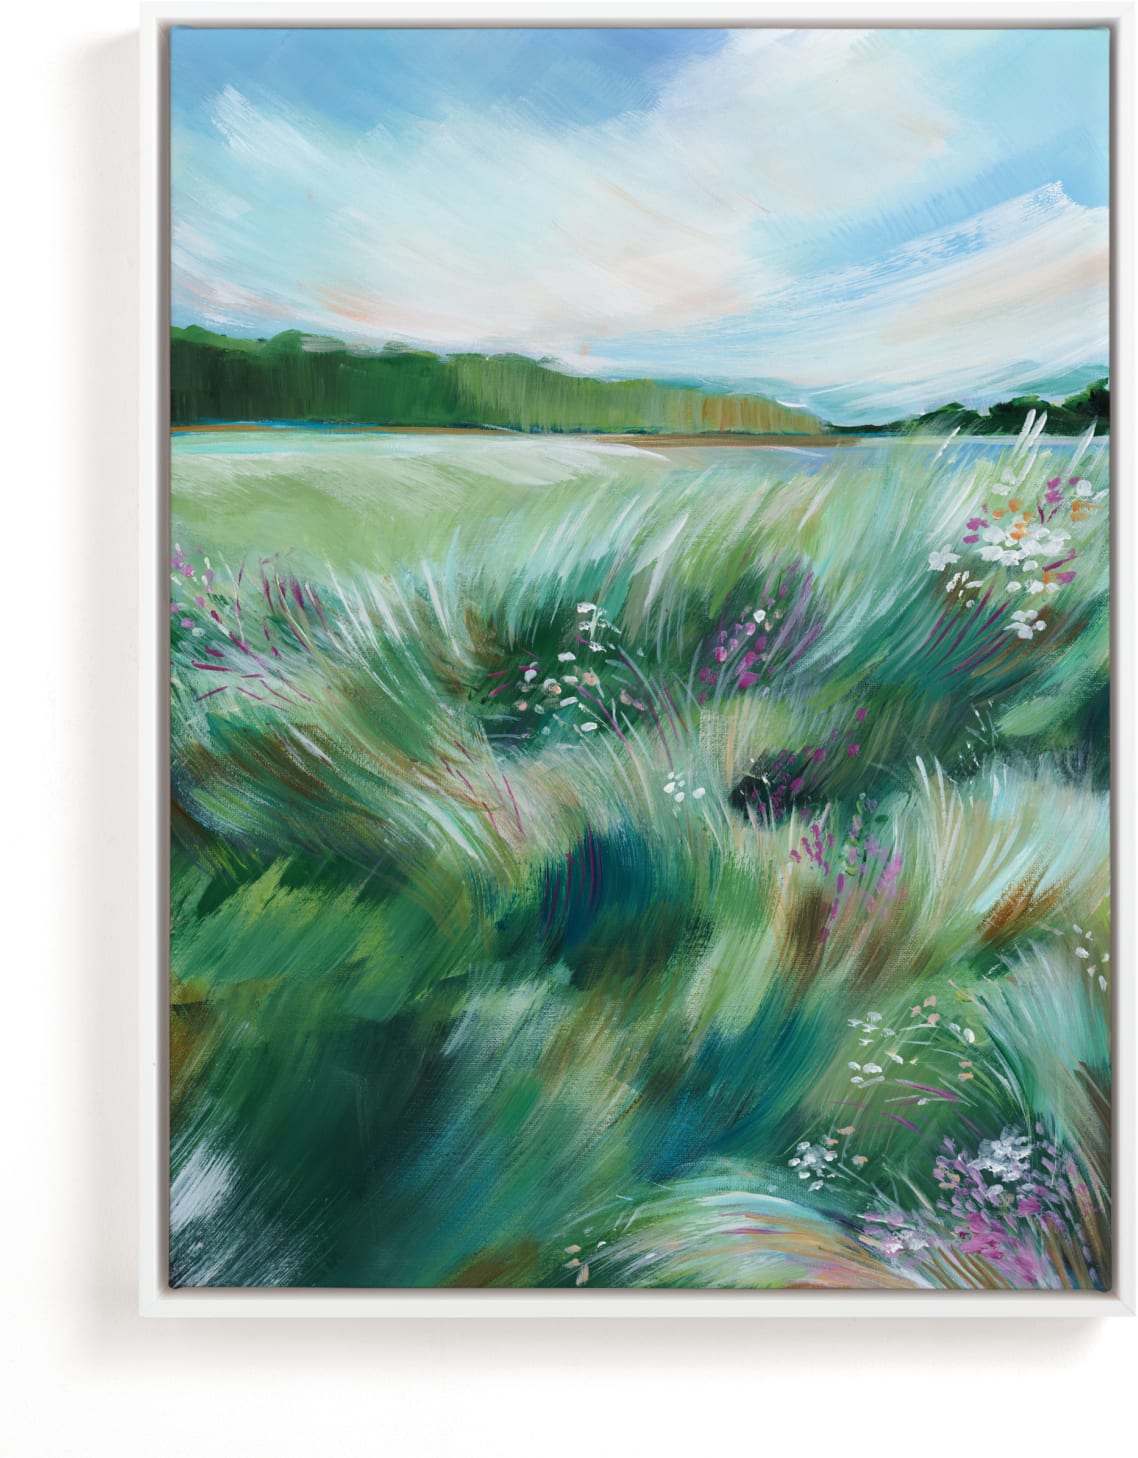 This is a blue, colorful, green art by AlisonJerry called Those Soft Summer Breezes.